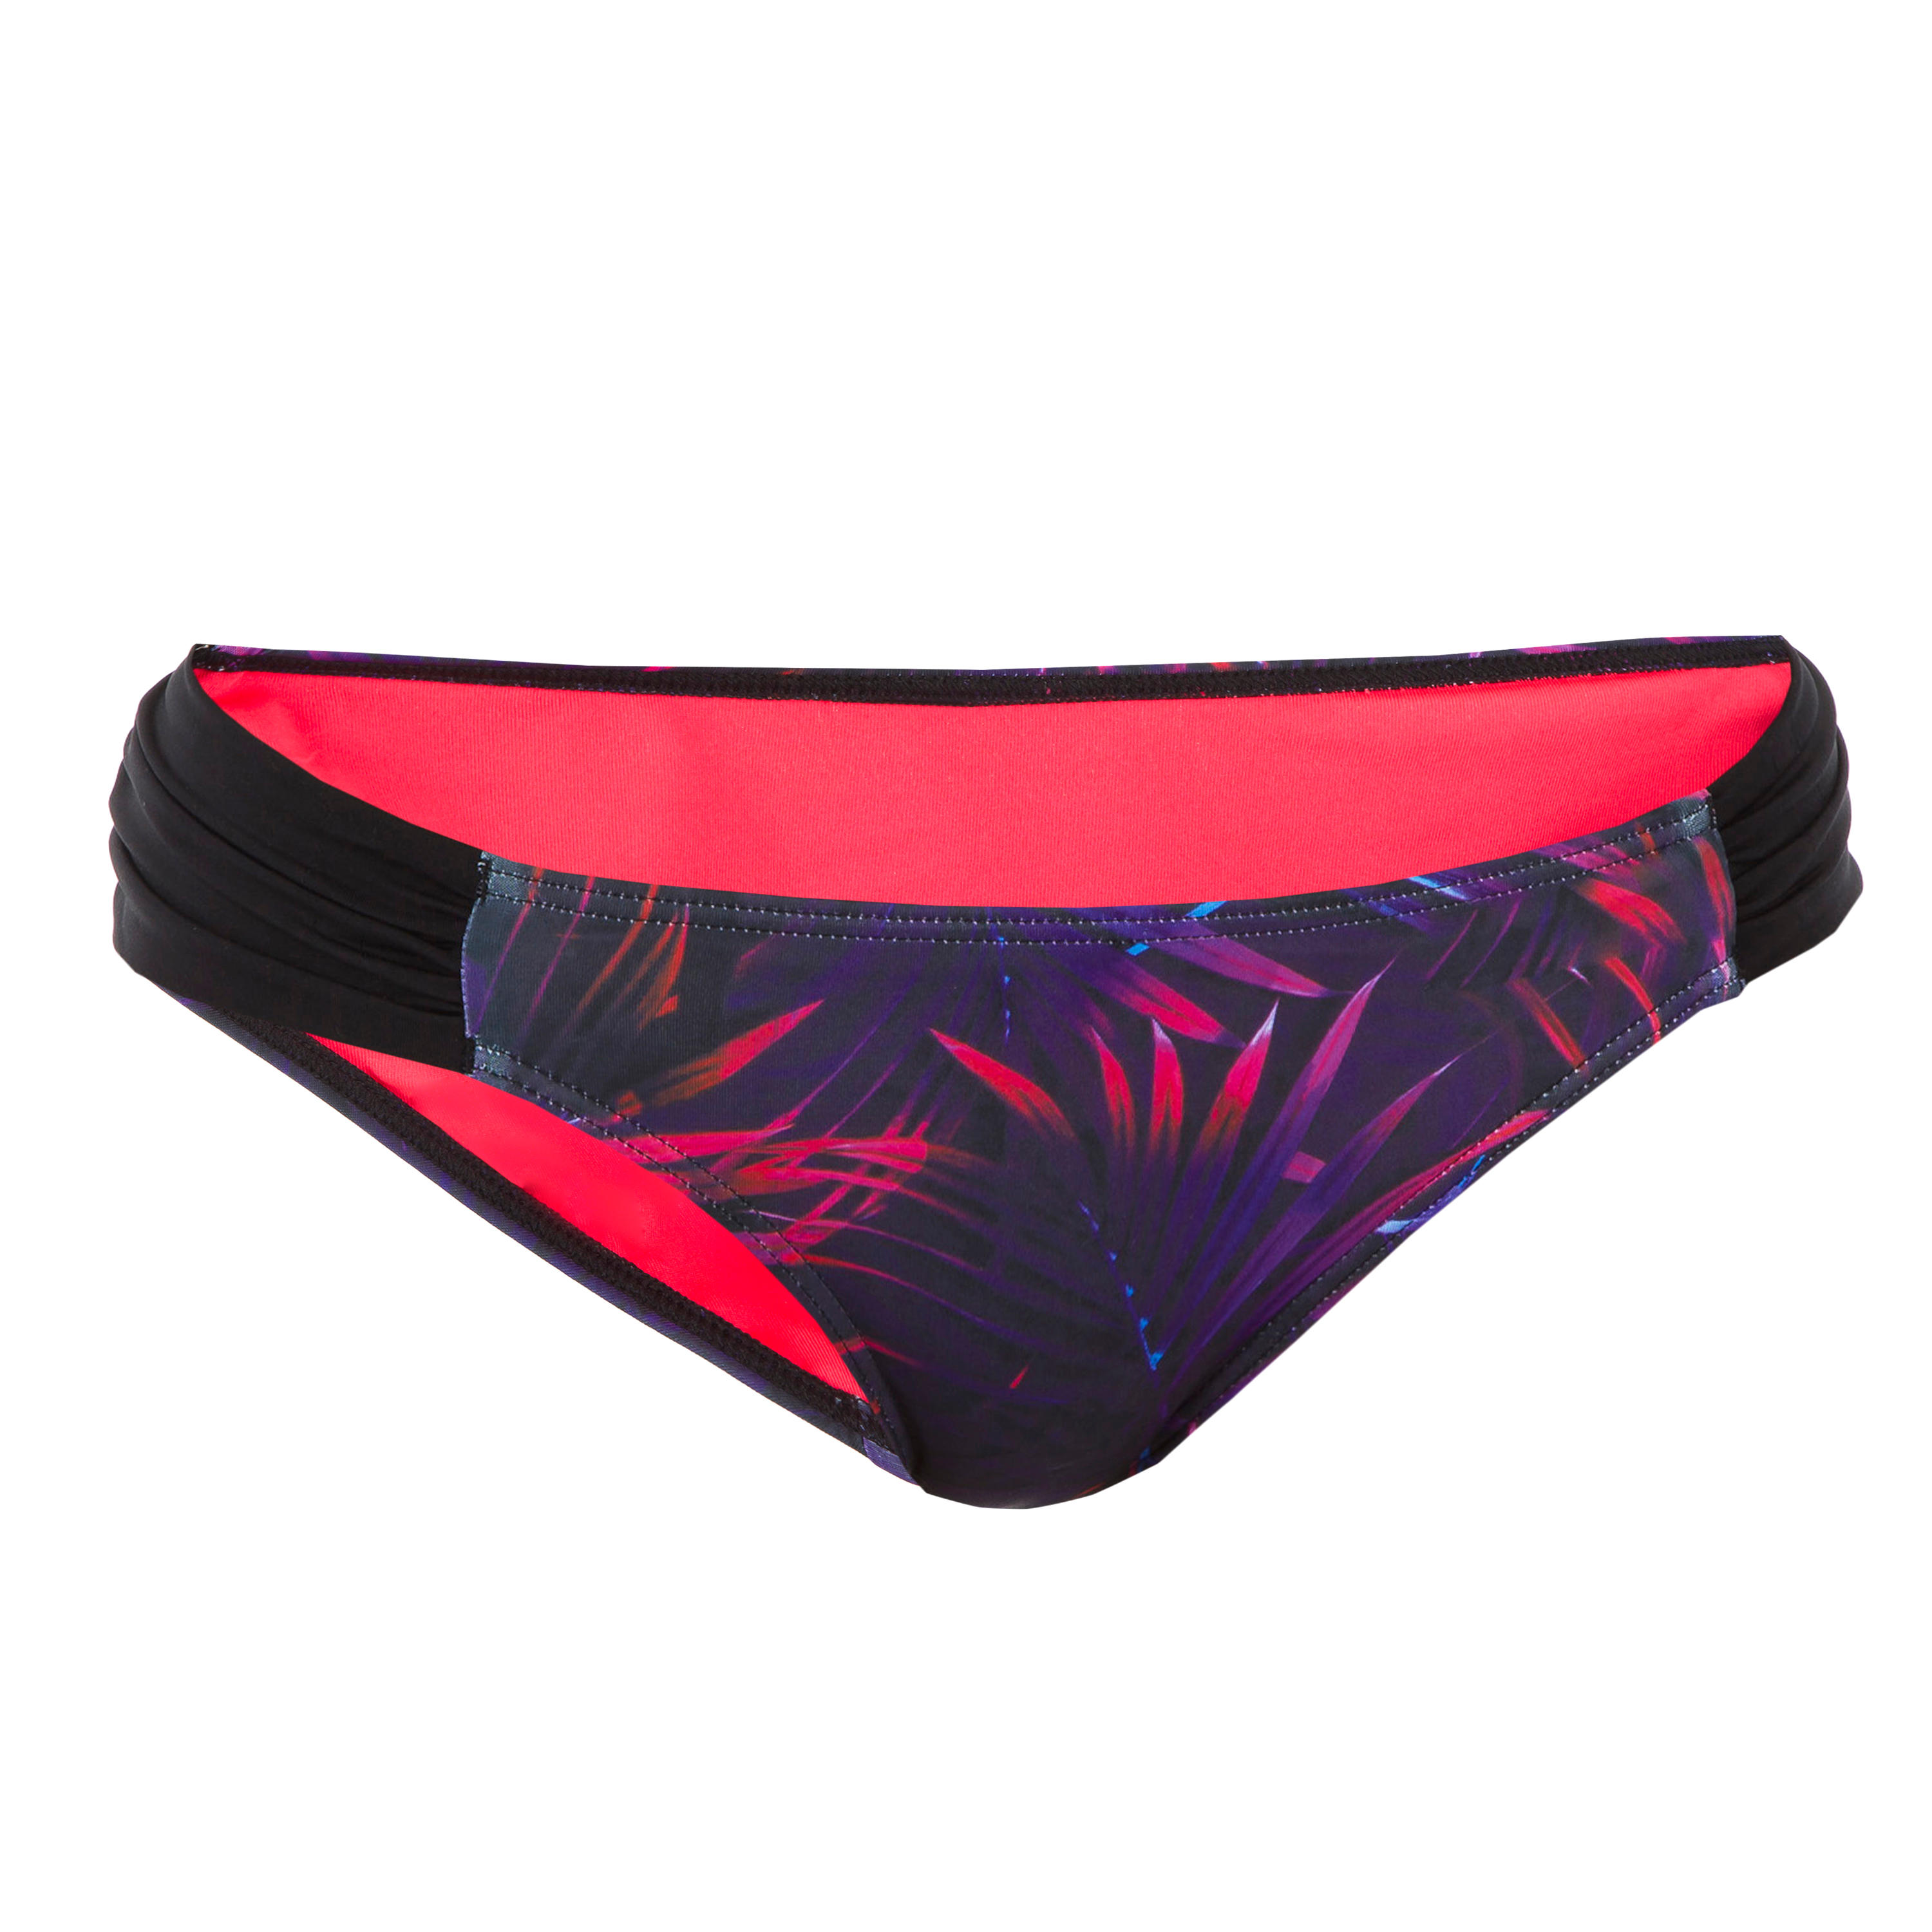 OLAIAN Women's surfing swimsuit bottoms with gathering at the sides NIKI PALMI